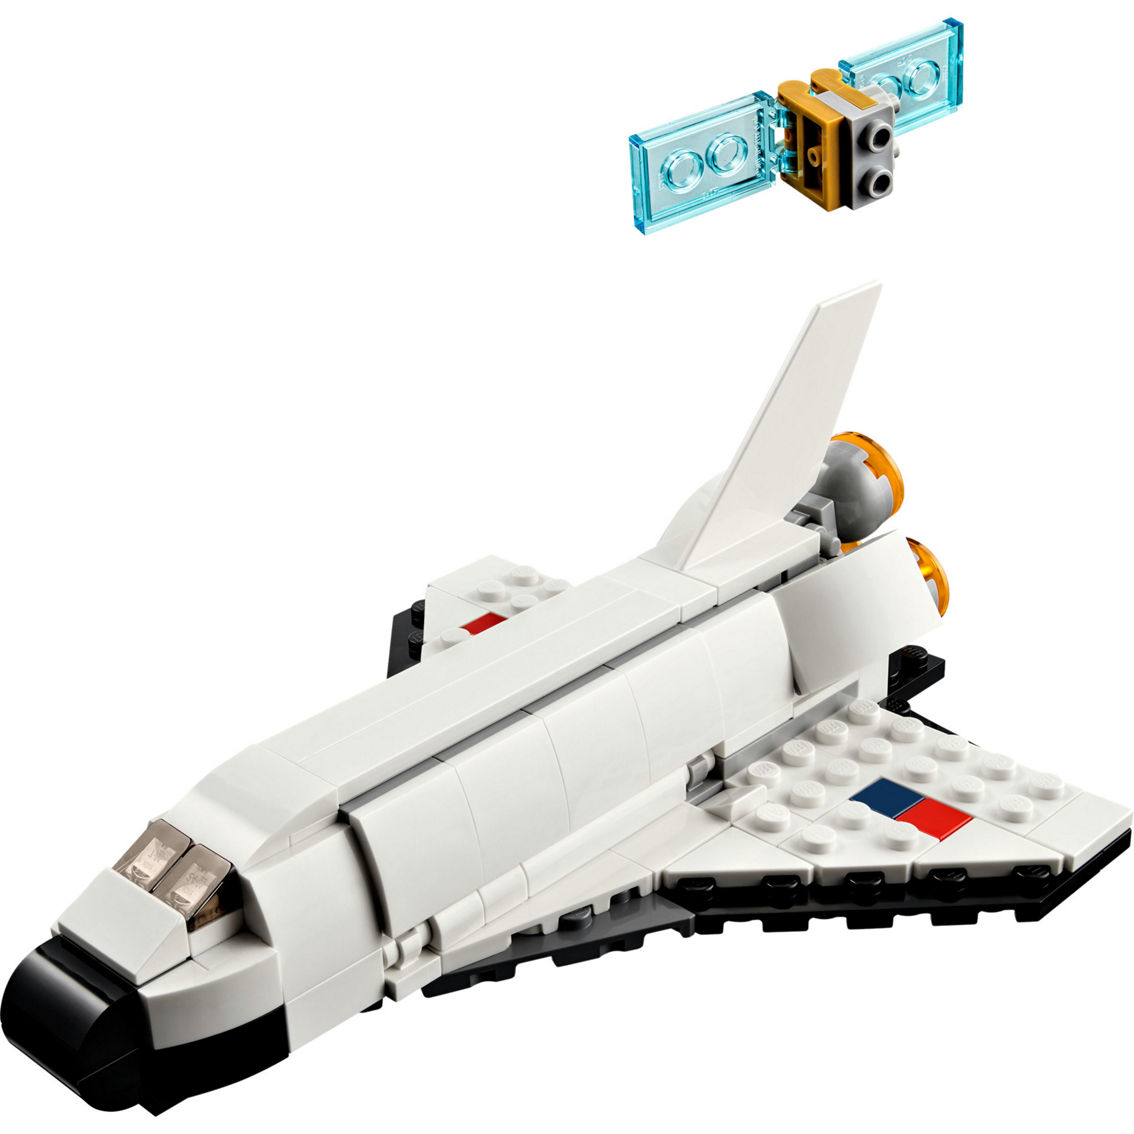 LEGO Creator 3 in 1 Space Shuttle 31134 - Image 3 of 6